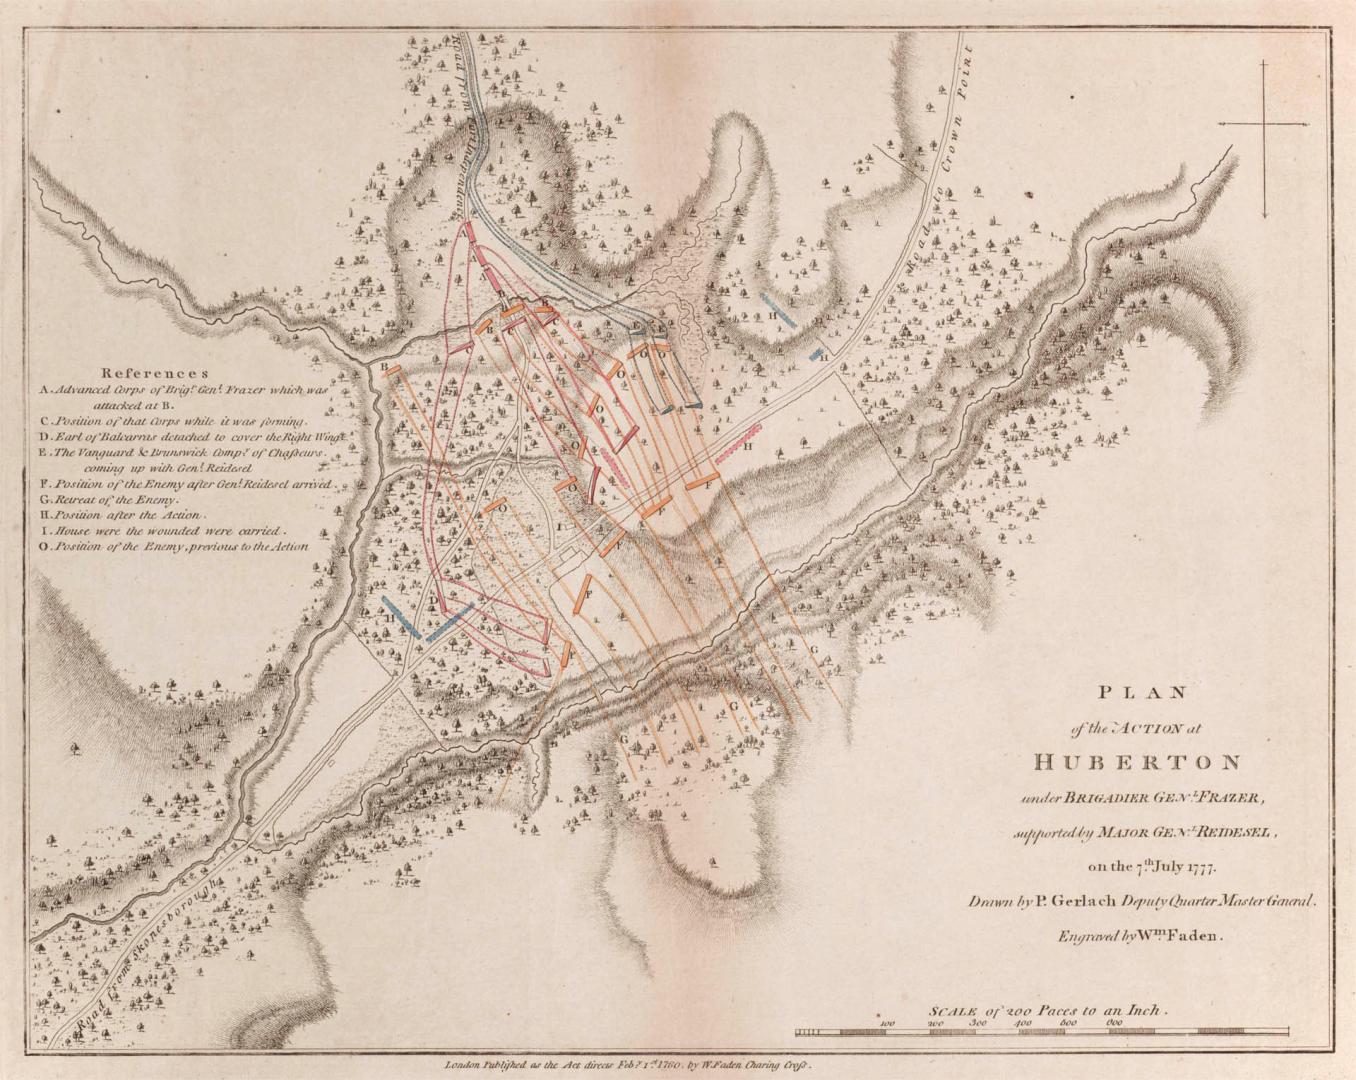 Plan of the Action at Huberton under Brigadier Genl Frazer, supported by Major General Reidesel, on 7th July 1777